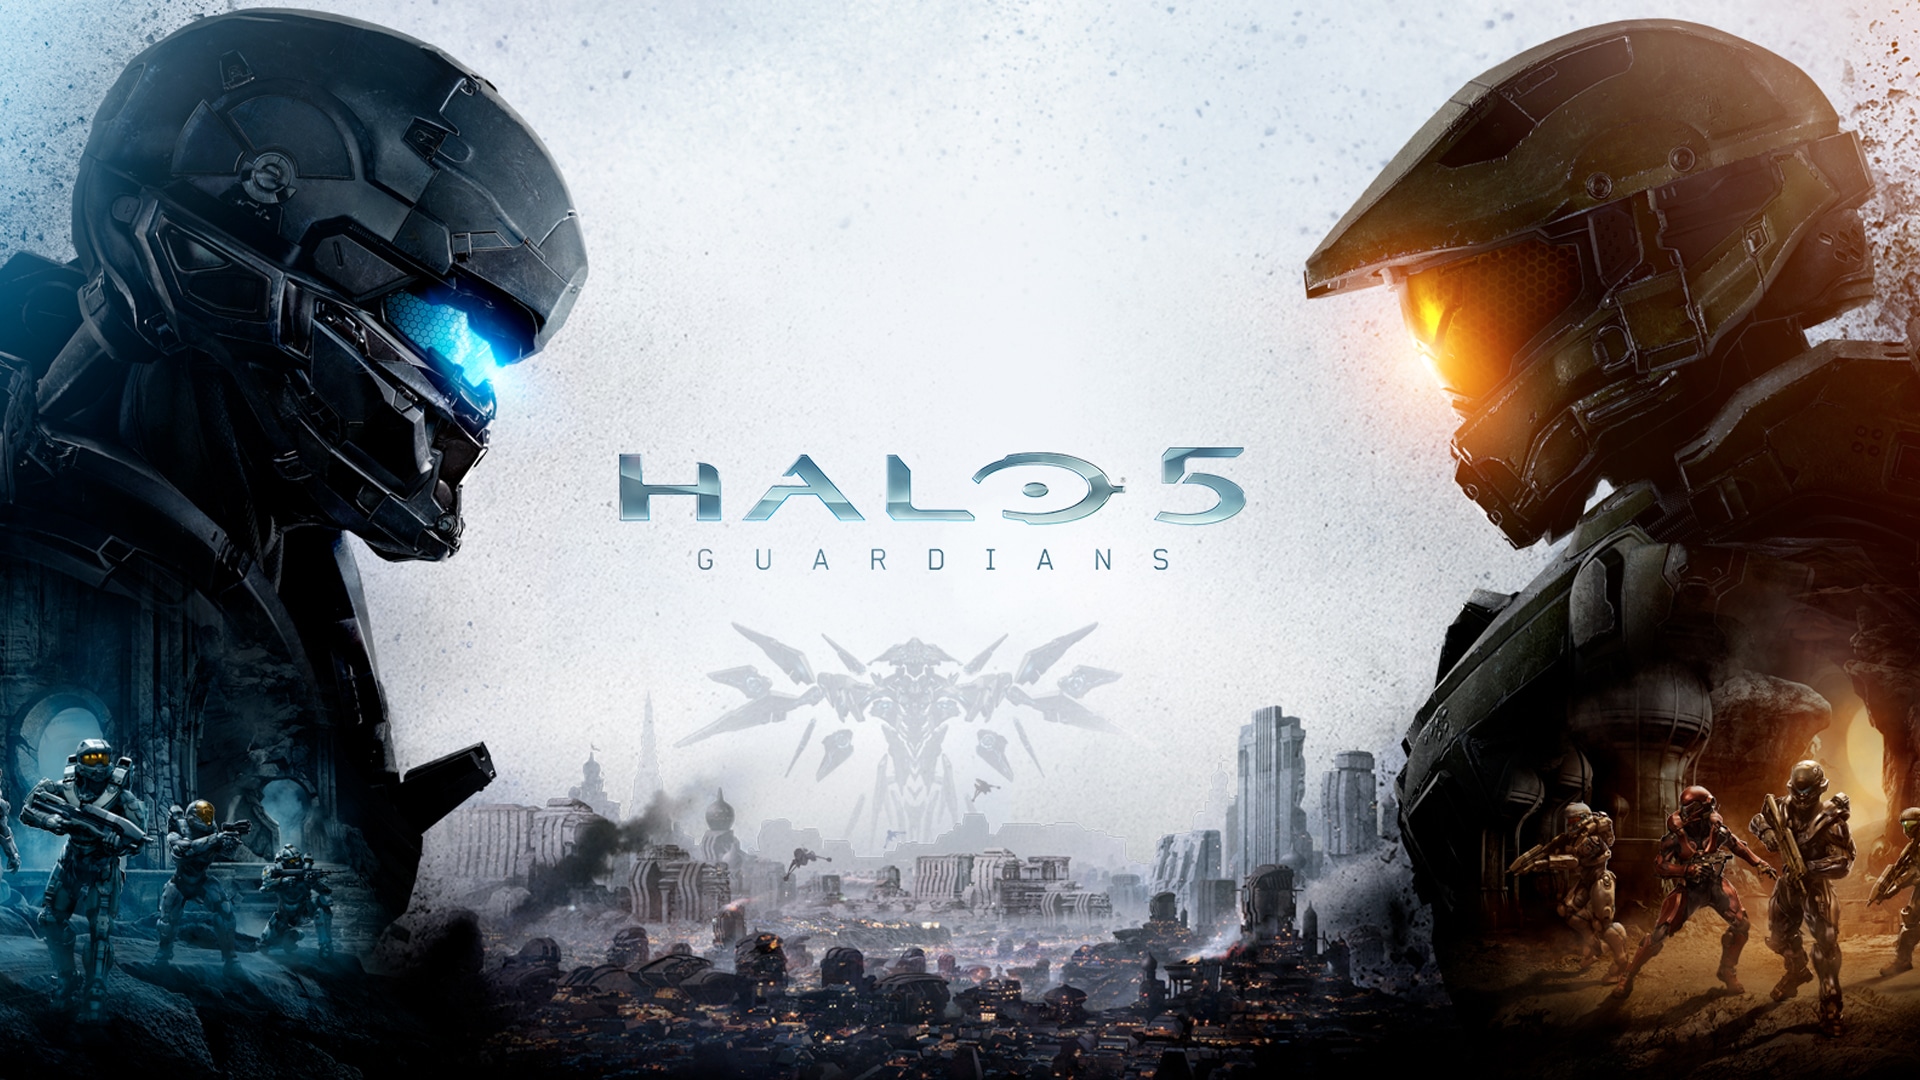 Halo, Halo 5, Halo: Master Chief Collection, Xbox, Xbox One, 343 Industries